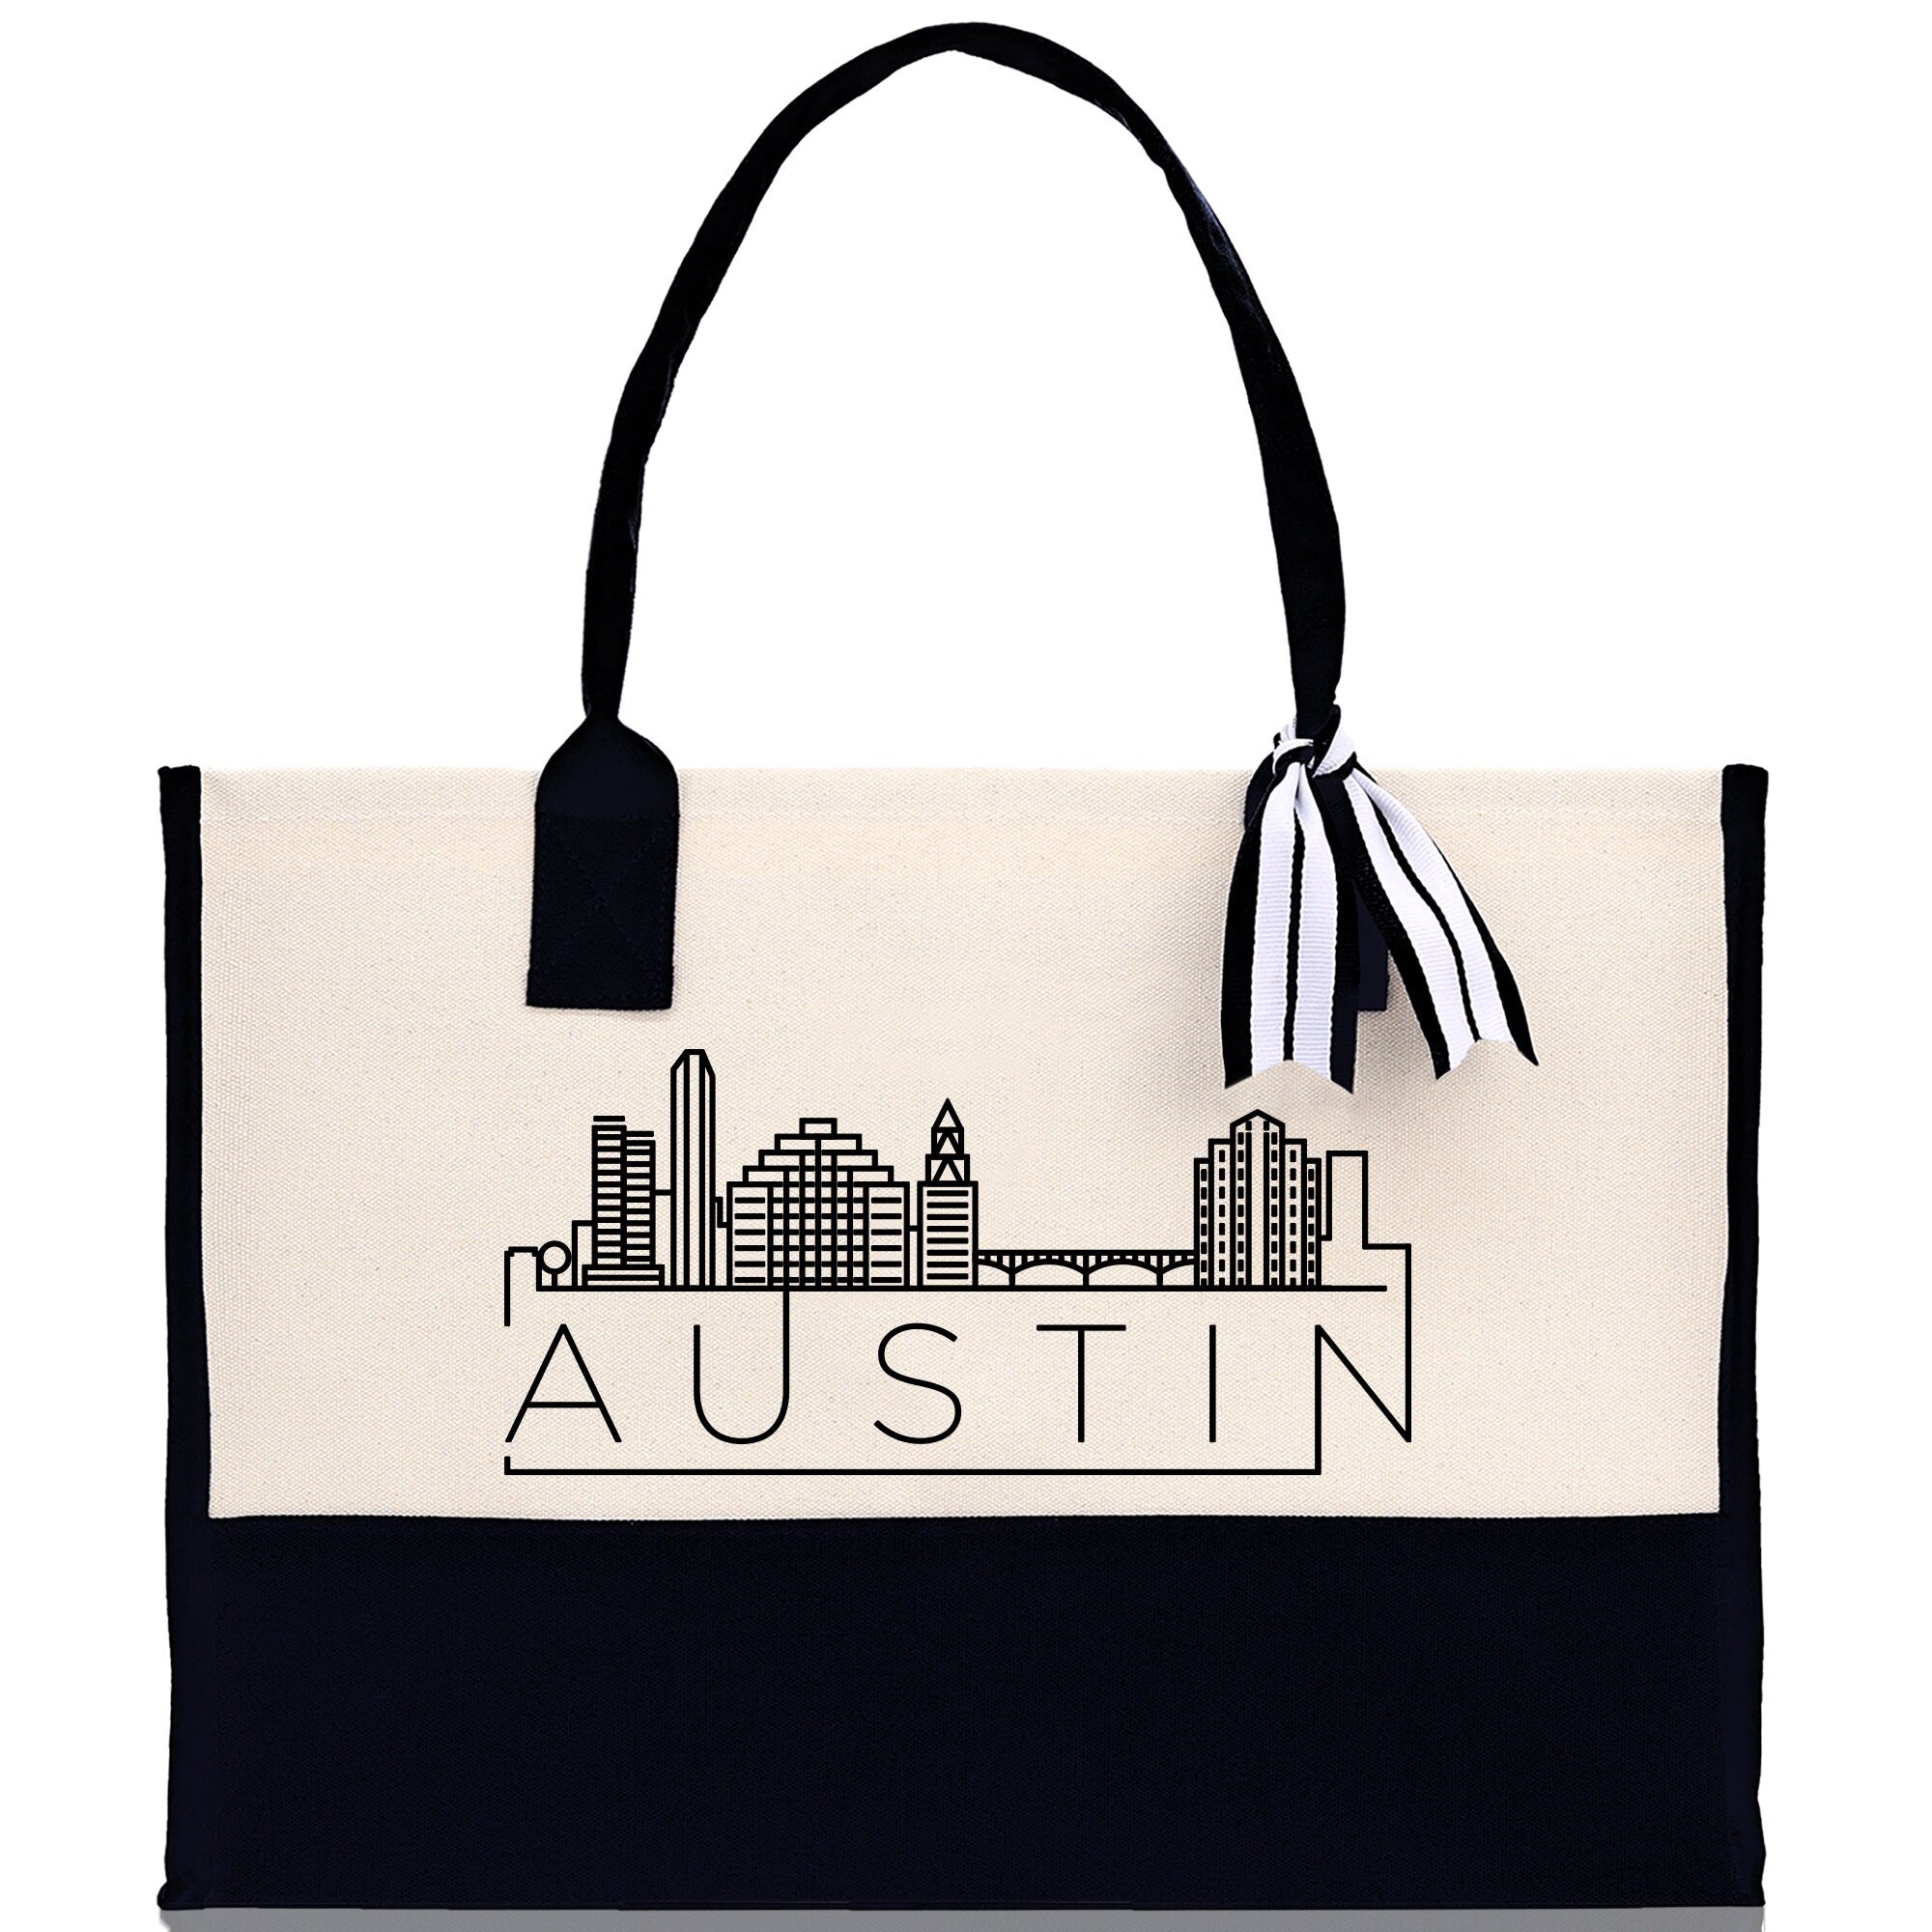 Austin Cotton Canvas Tote Bag TX Travel Vacation Tote Employee and Client Gift Wedding Favor Birthday Welcome Tote Bag Bridesmaid Gift